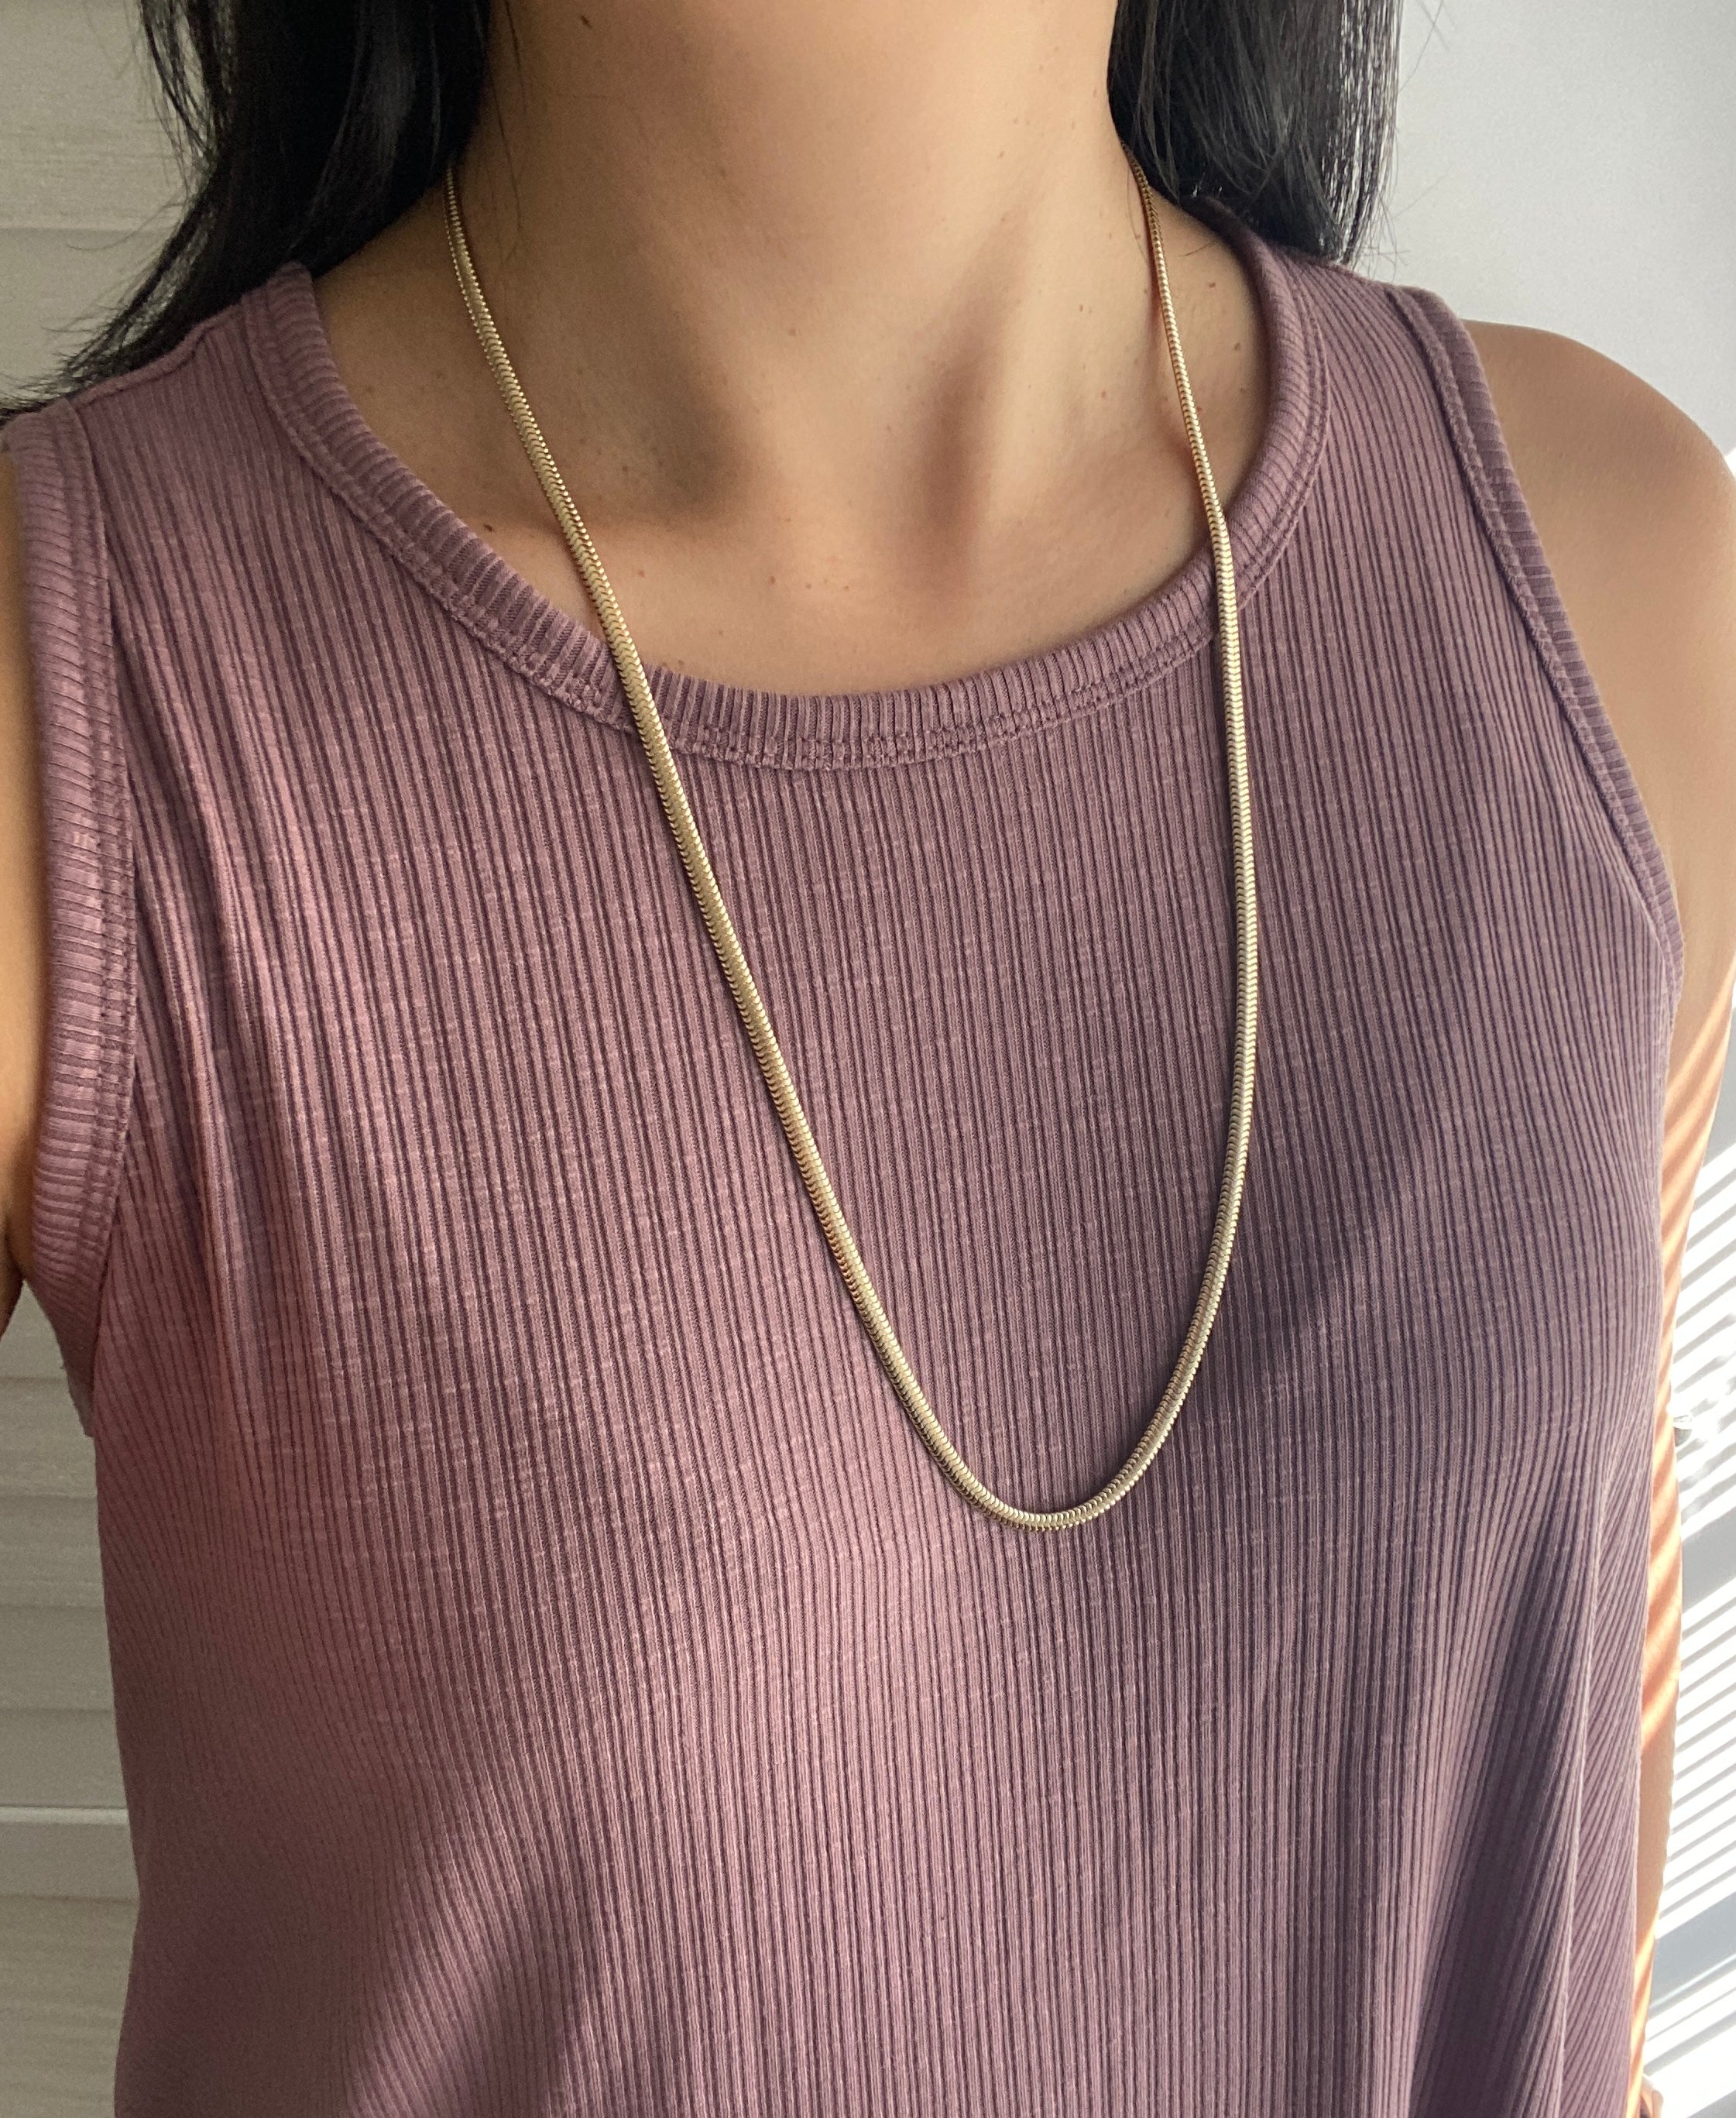 14K Gold/Silver Plated Snake Chain Necklace Herringbone Necklace Gold  Choker Necklaces for Women 1.5/3/5MM(W) 14